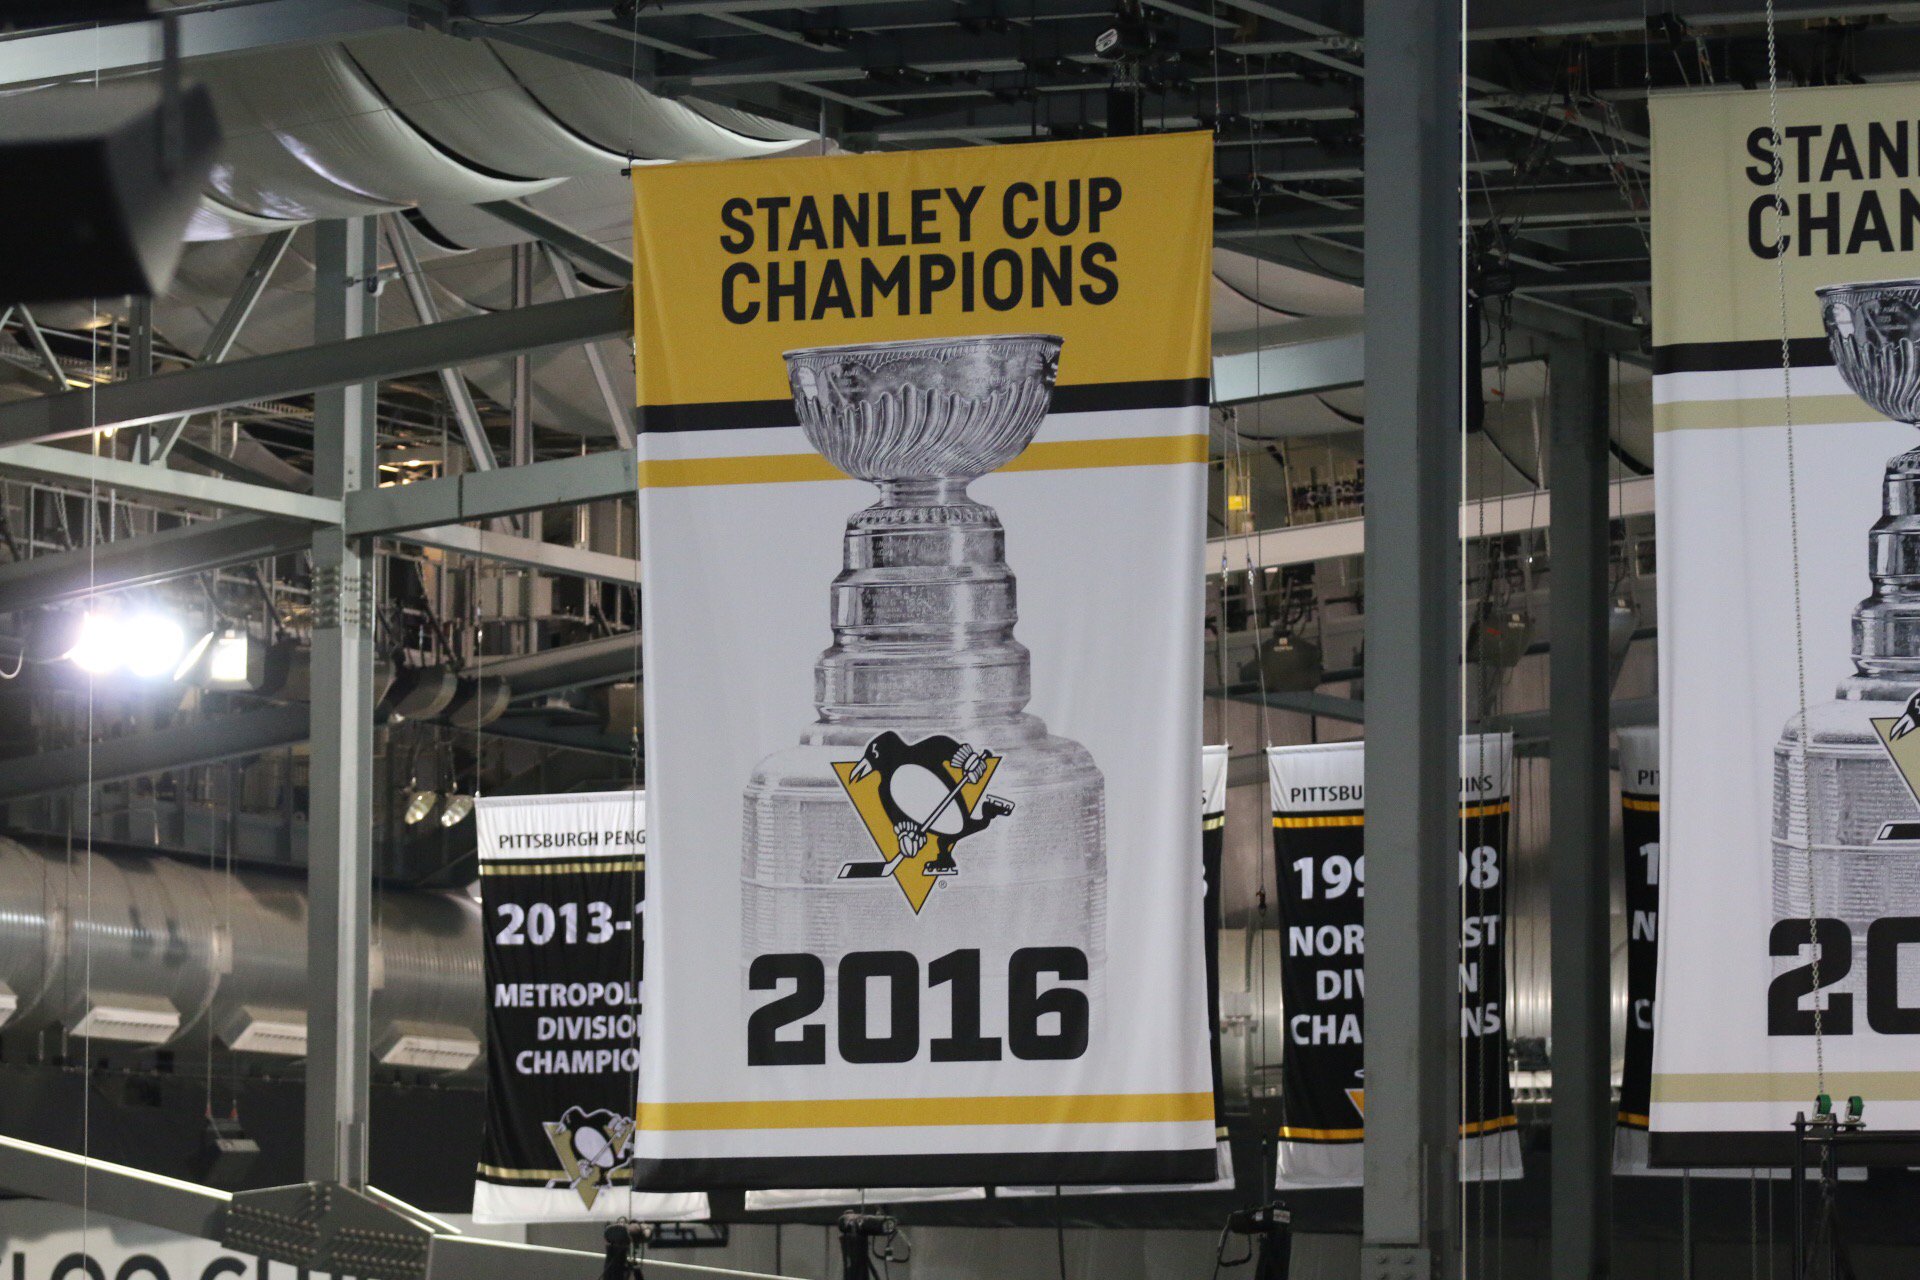 Pittsburgh Penguins on Twitter "New banners this year for the Penguins